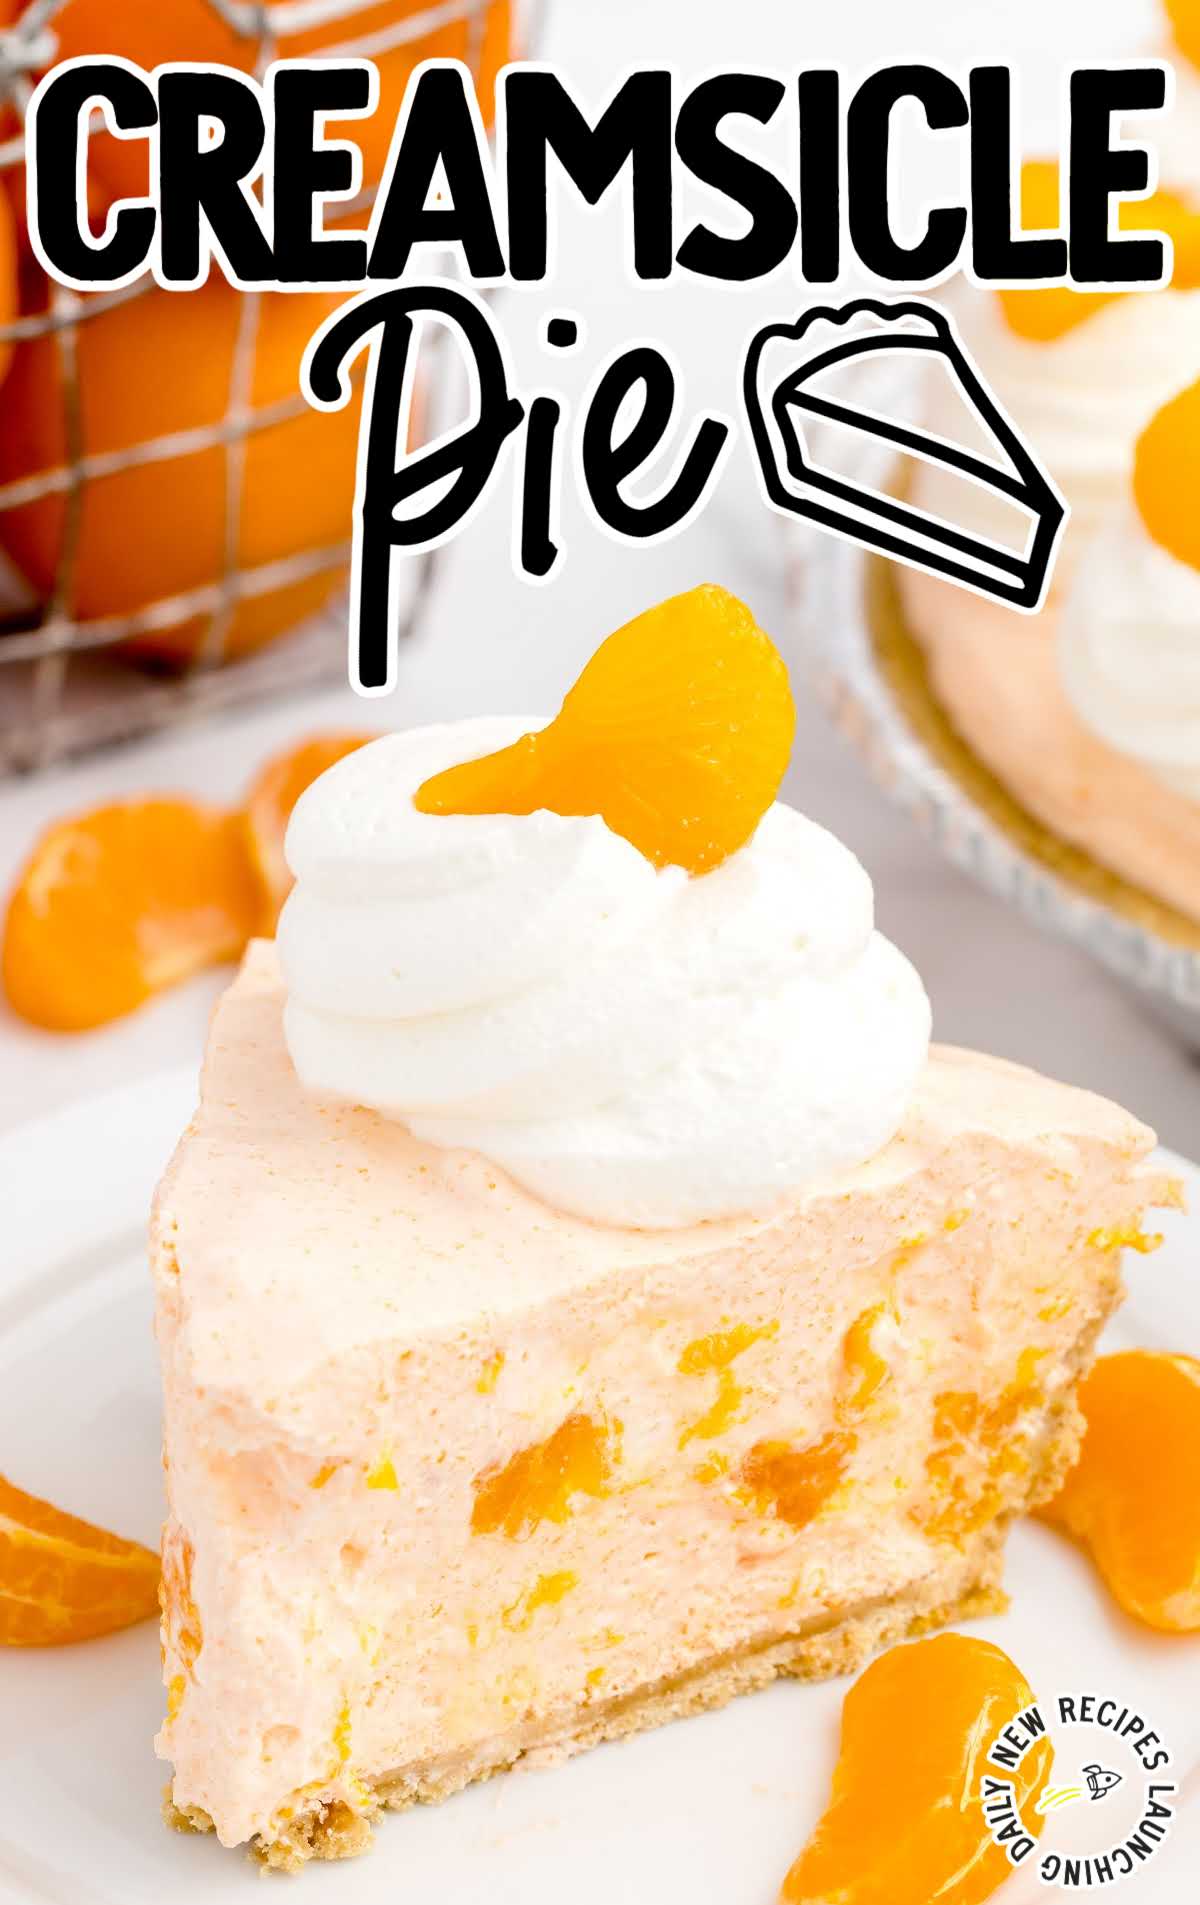 close up shot of a slice of pie topped with whipped cream and a mandarin orange on a plate